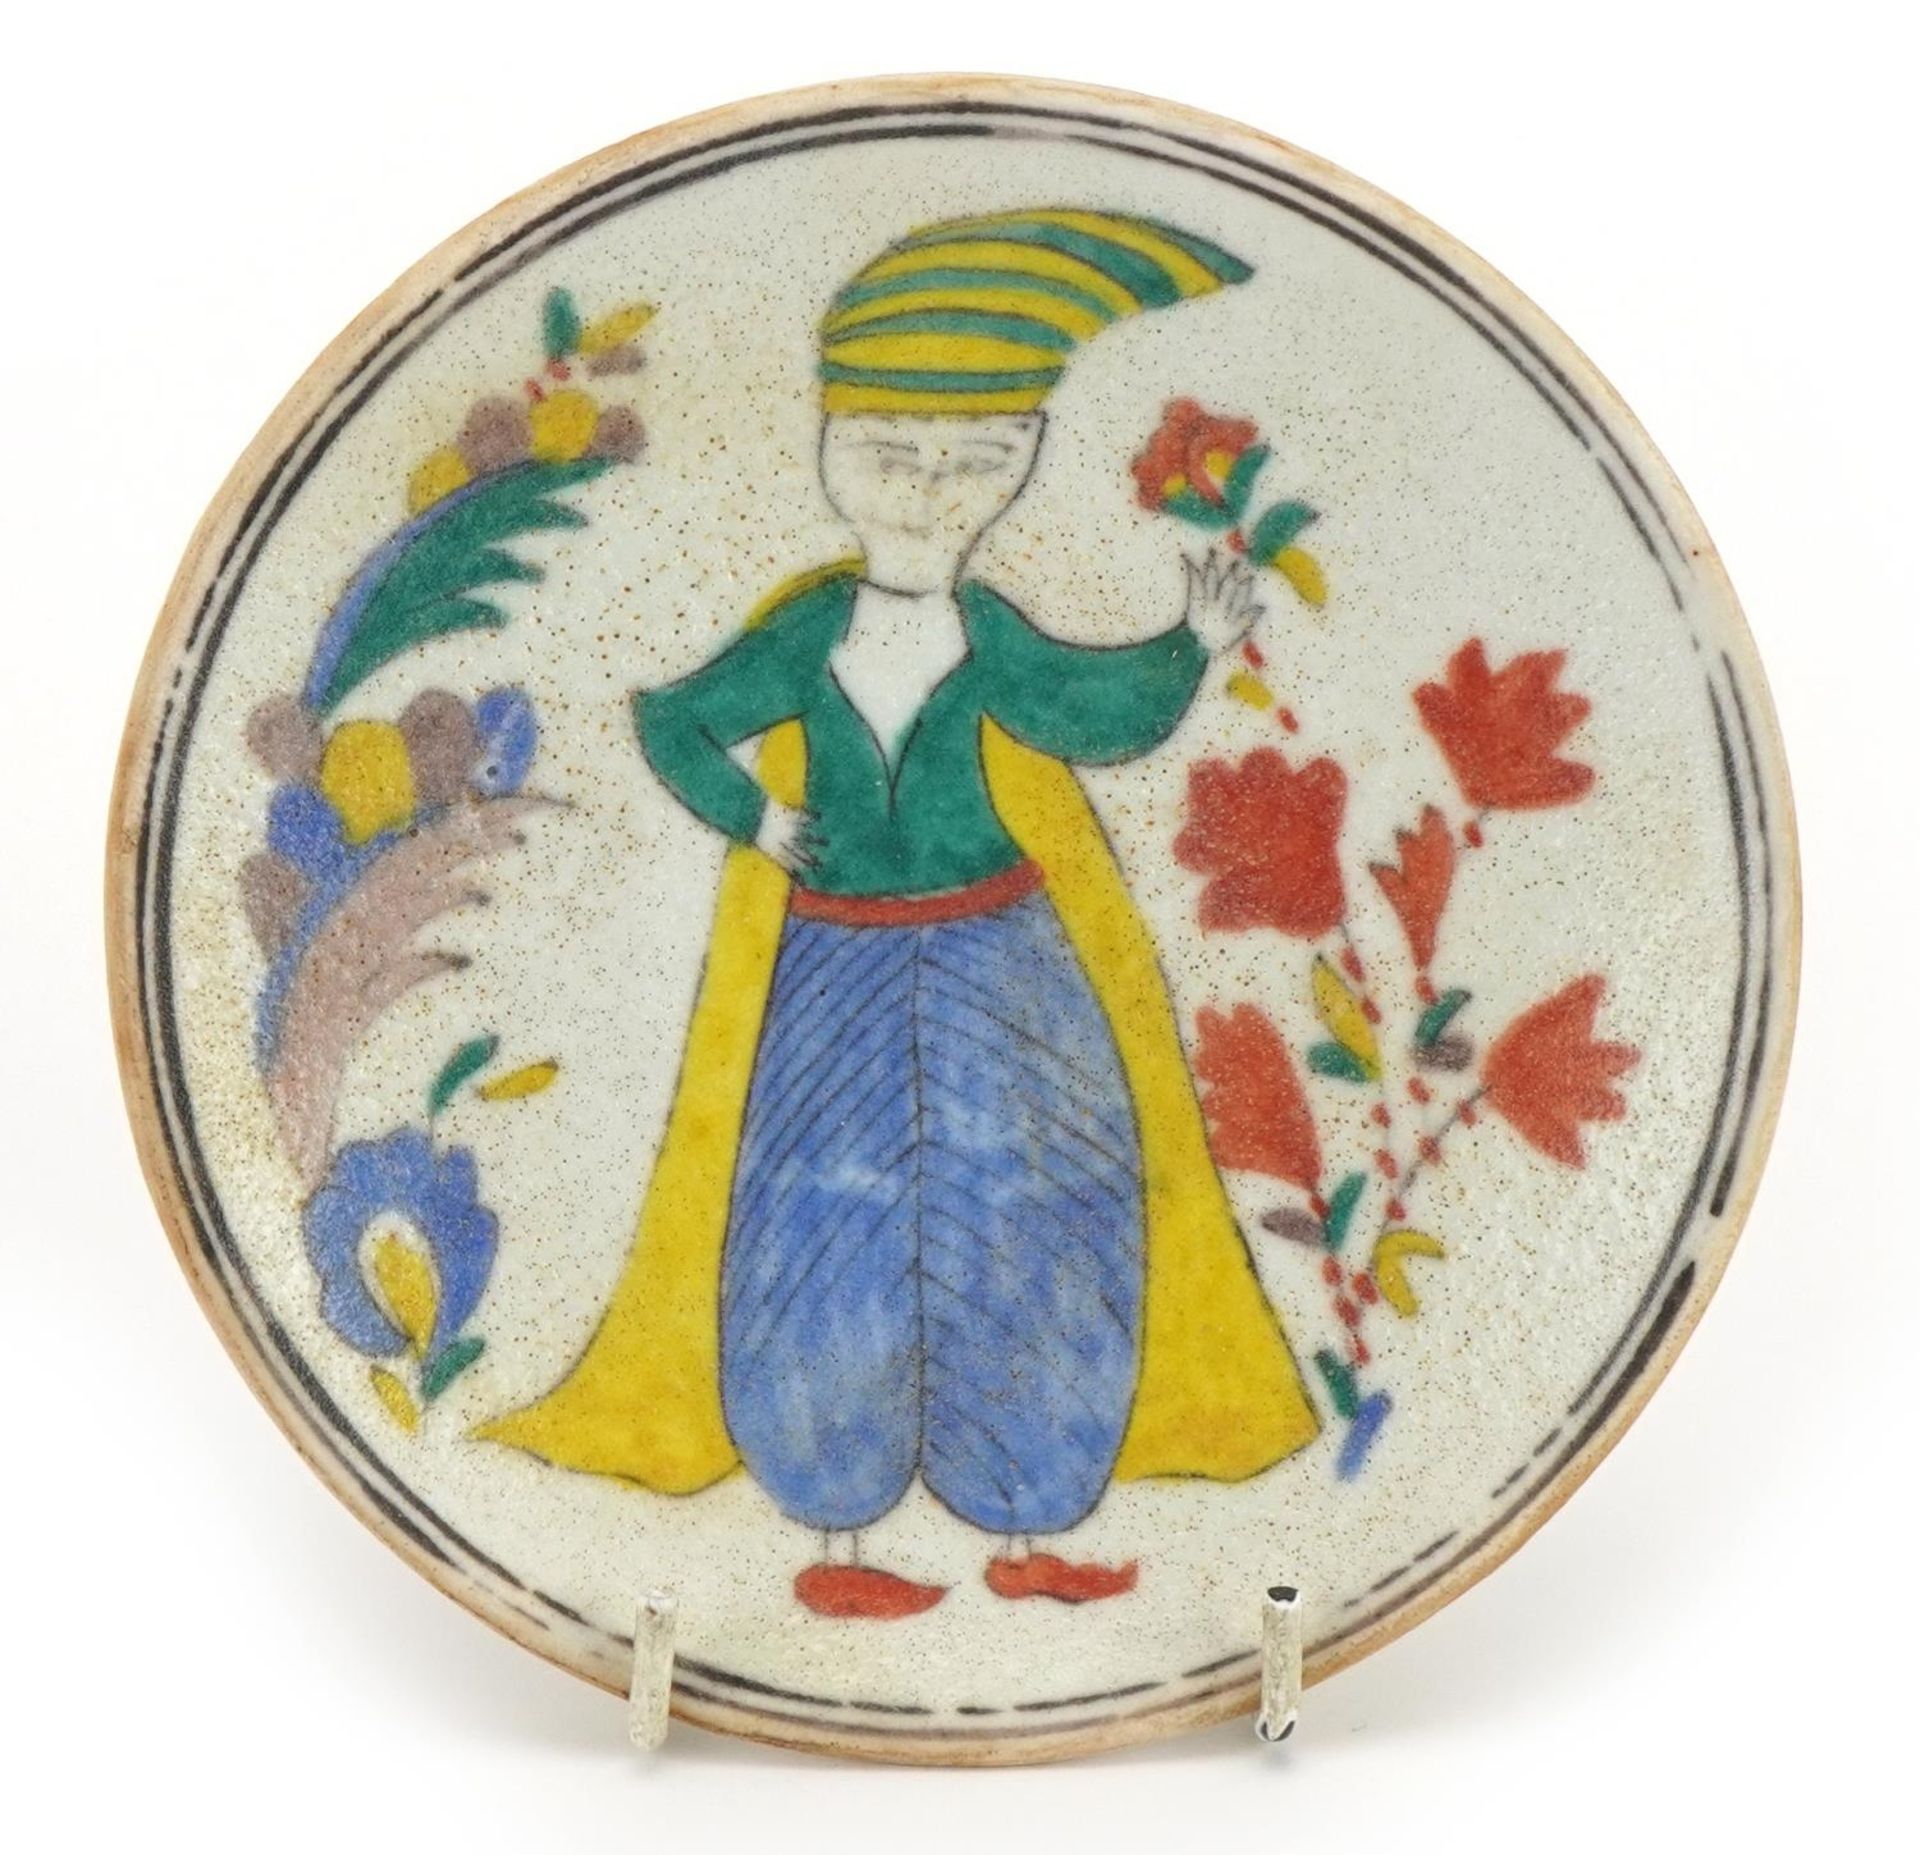 Turkish Kutahya pottery dish hand painted with a figures and flowers, 14cm in diameter